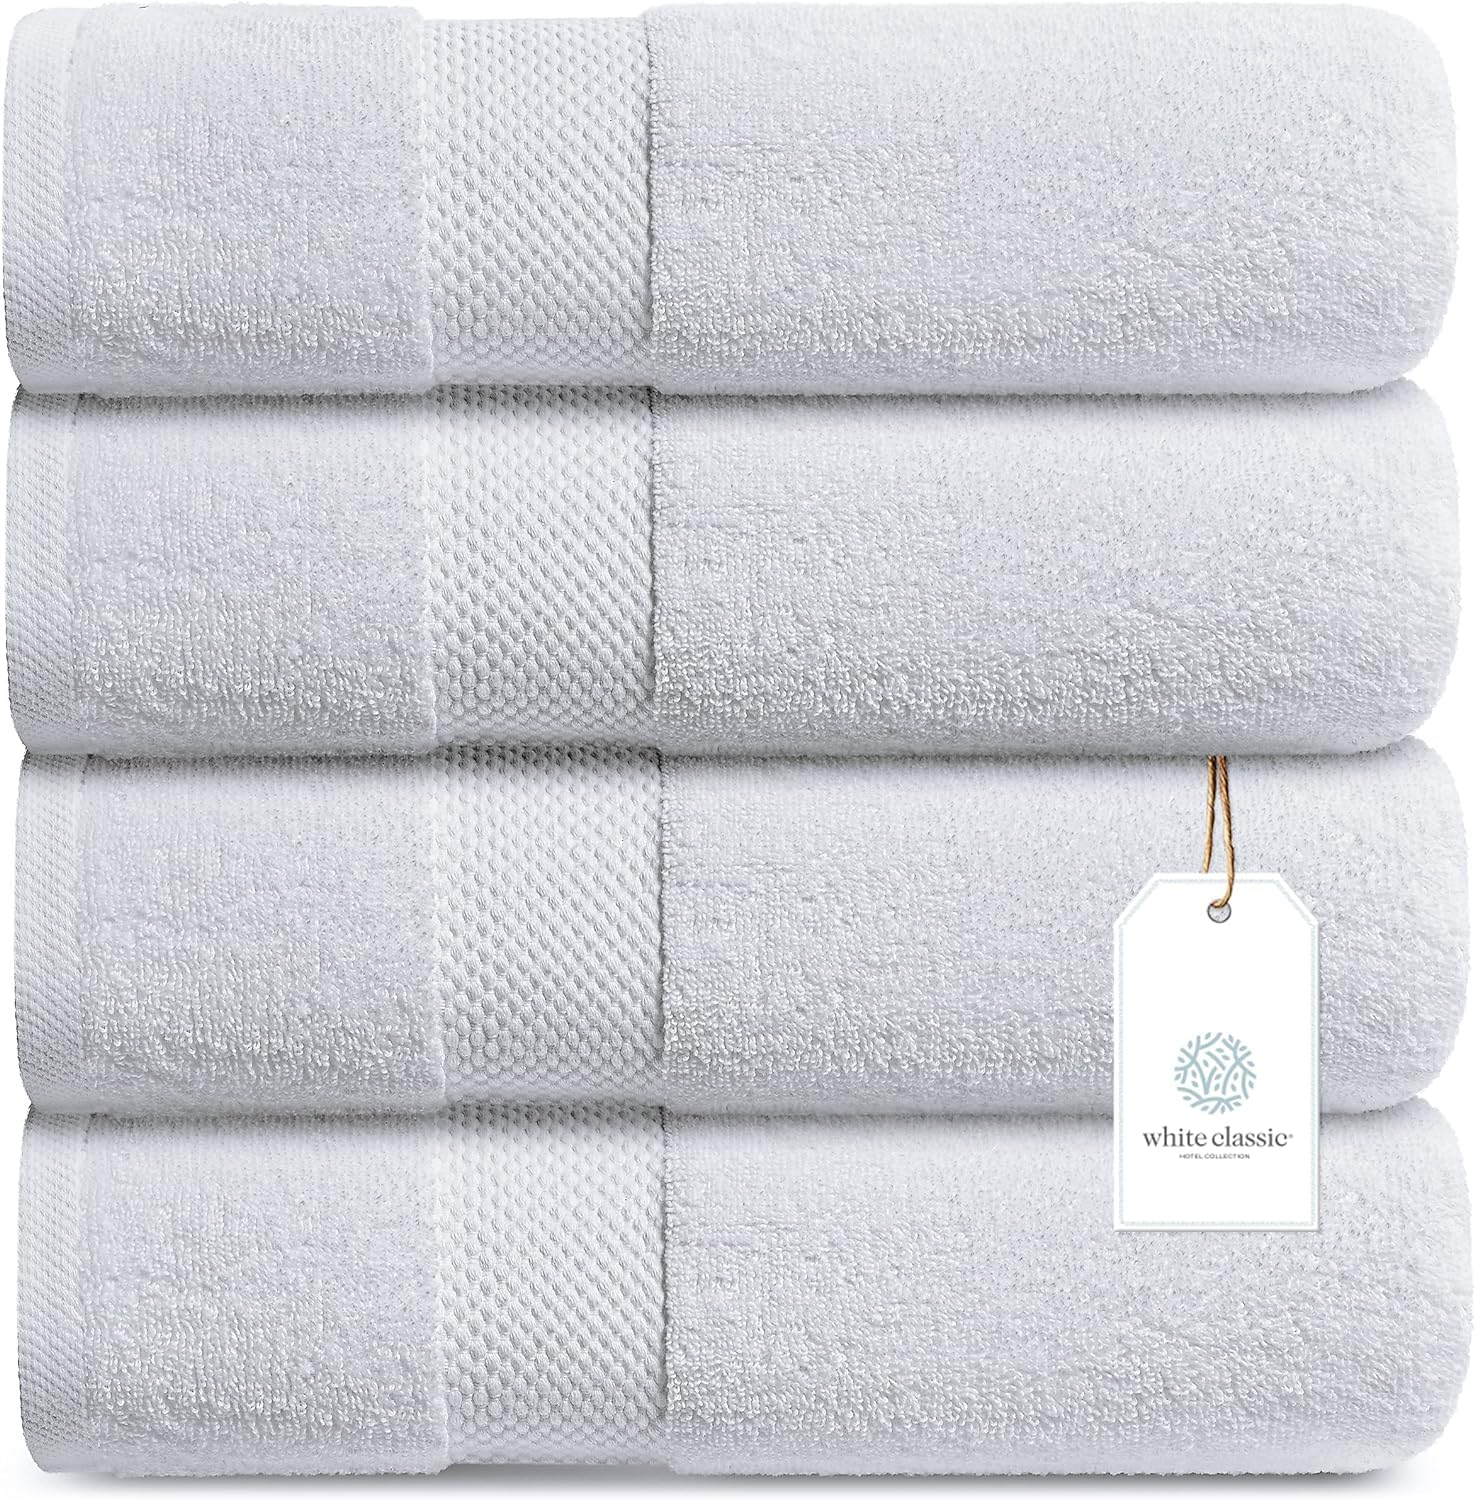 Luxury White Bath Towels Extra Large | 100% Soft Cotton 700 GSM Thick 2Ply Absorbent Quick Dry Hotel Bathroom Towel | 27x54 Inch | White | Set of 4  - Like New